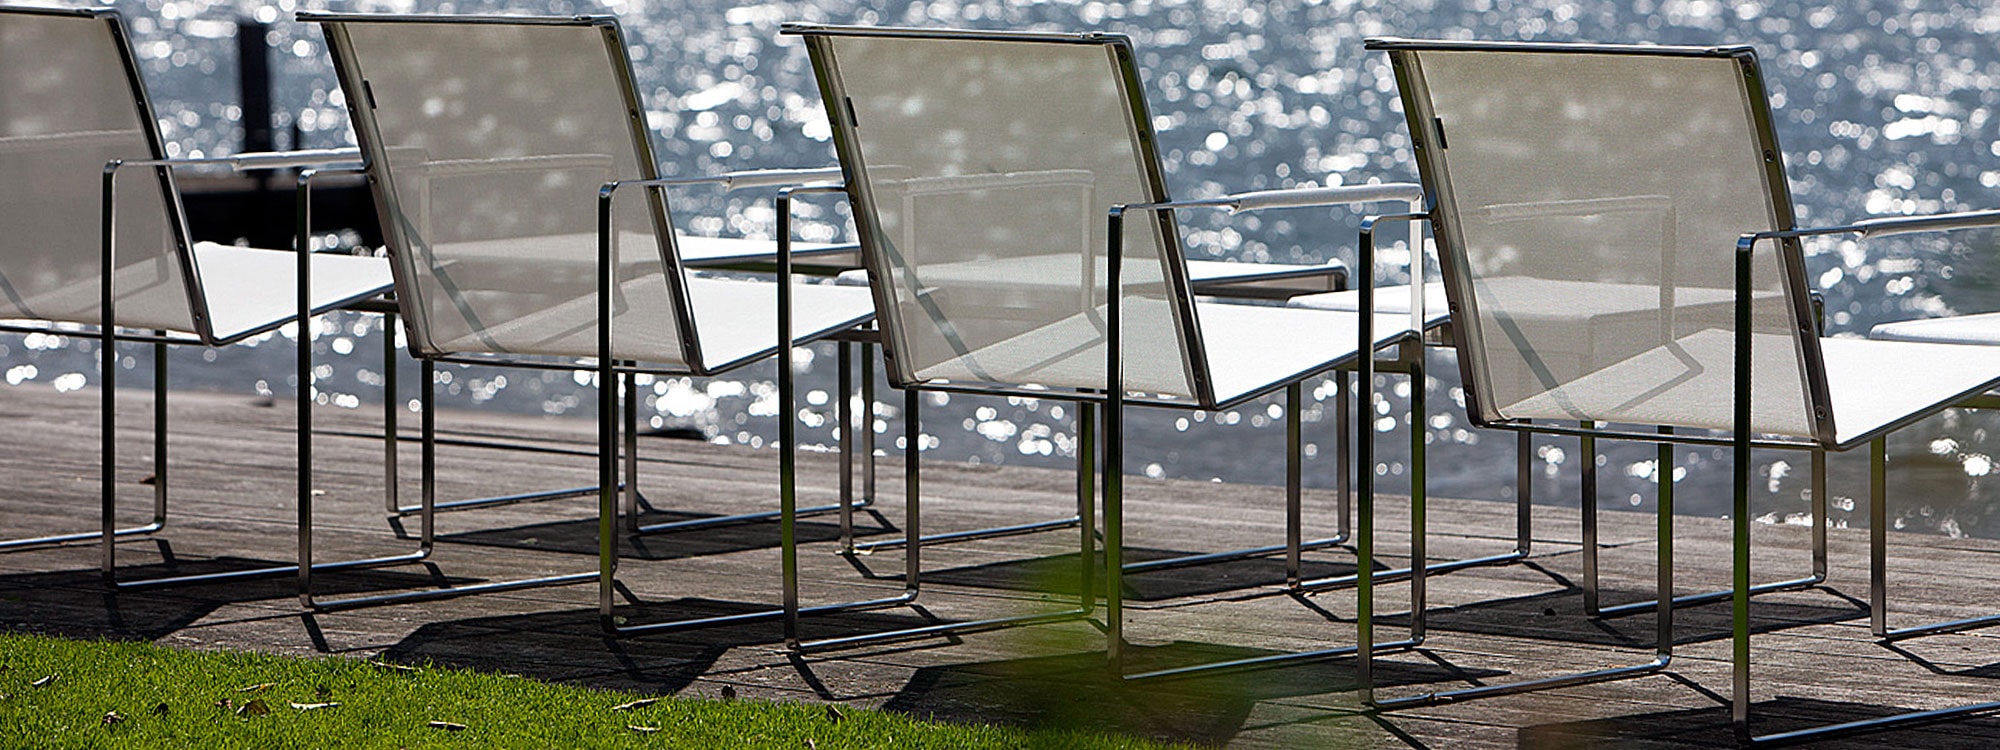 Image of row of Poltrona outdoor lounge chairs and foot stools designed by Henk Steenbakkers on sunny decking next to Dutch lake